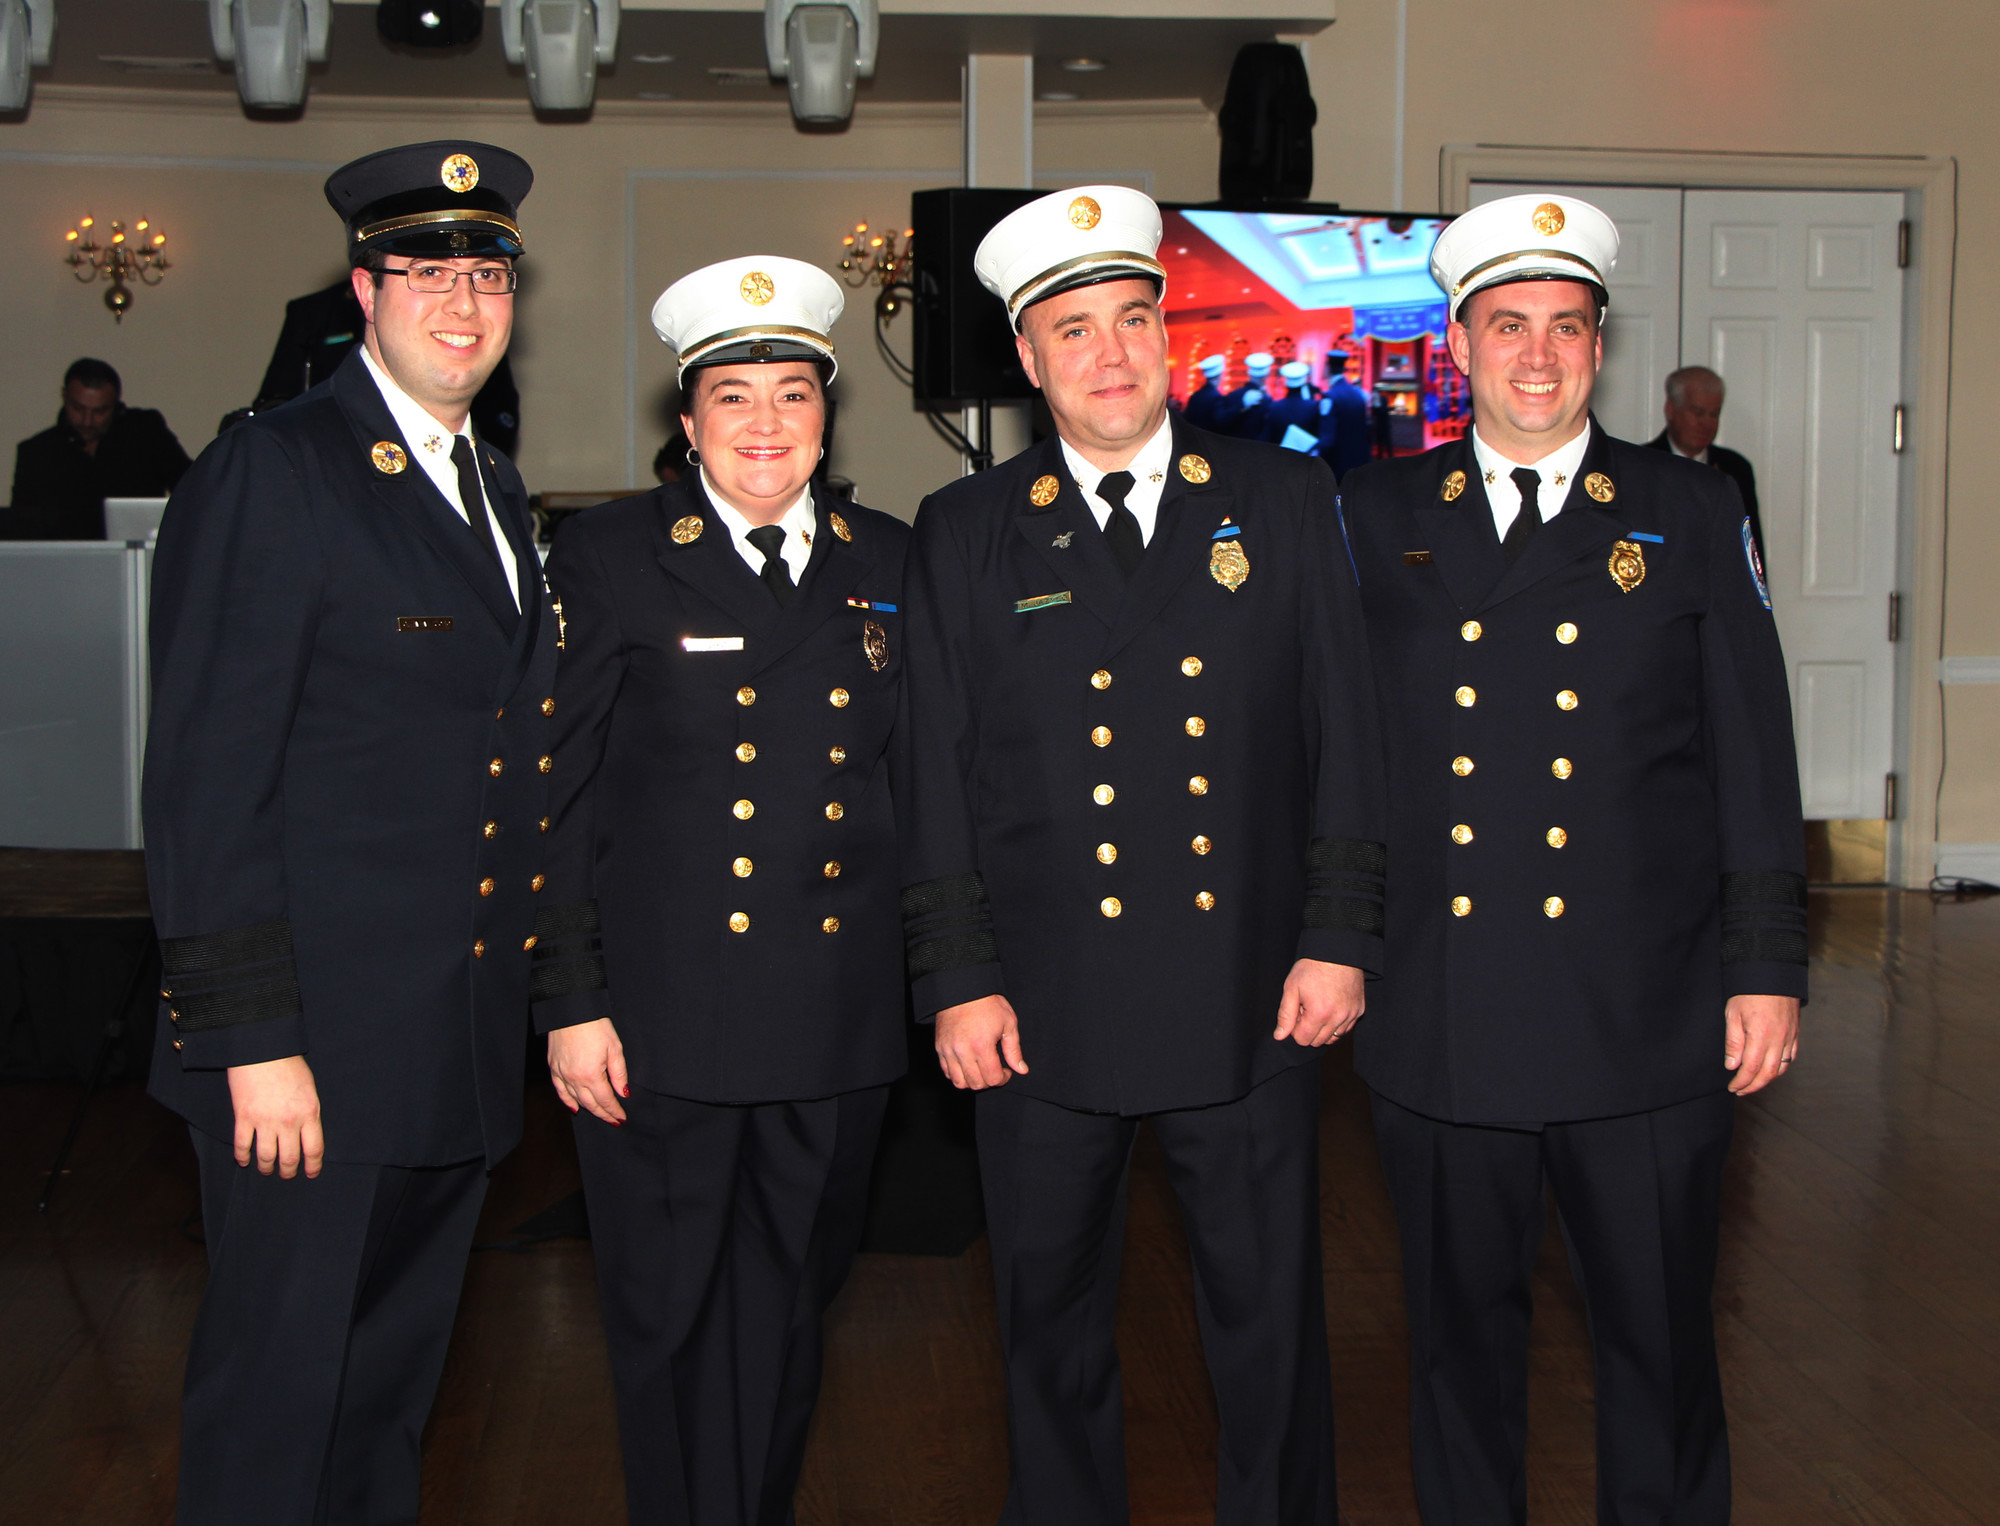 The BfD was represented well, including, from left, Ex-Chief Craig Yanantuono, Chief Karen Bendel, Michael Jazylo, first deputy chief, and Frank Cesare, second deputy chief.